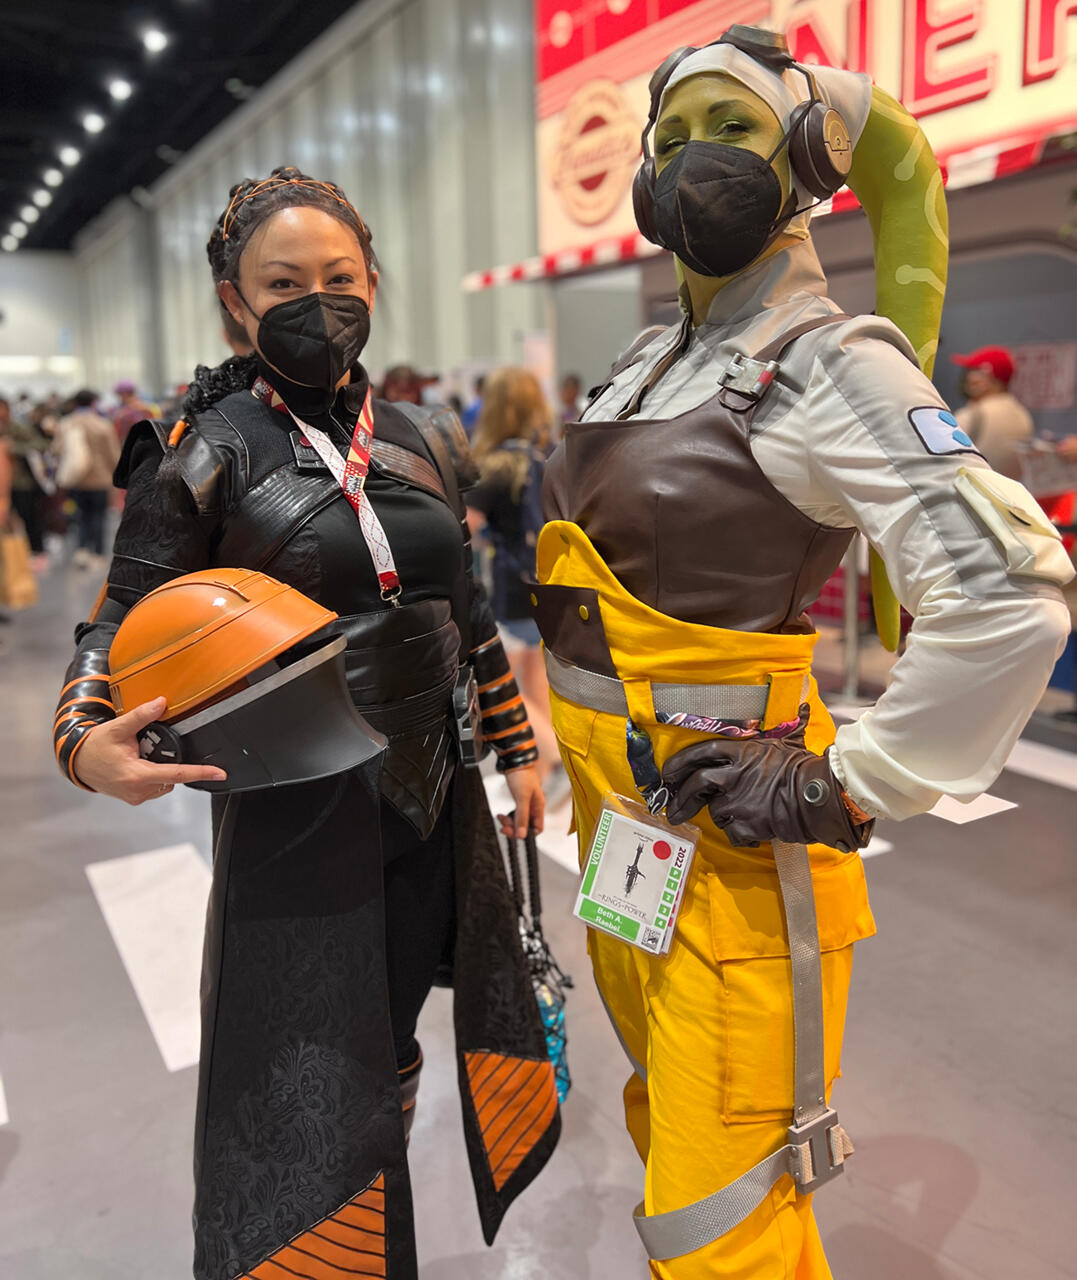 Fennec Shand and Hera Syndulla from Star Wars